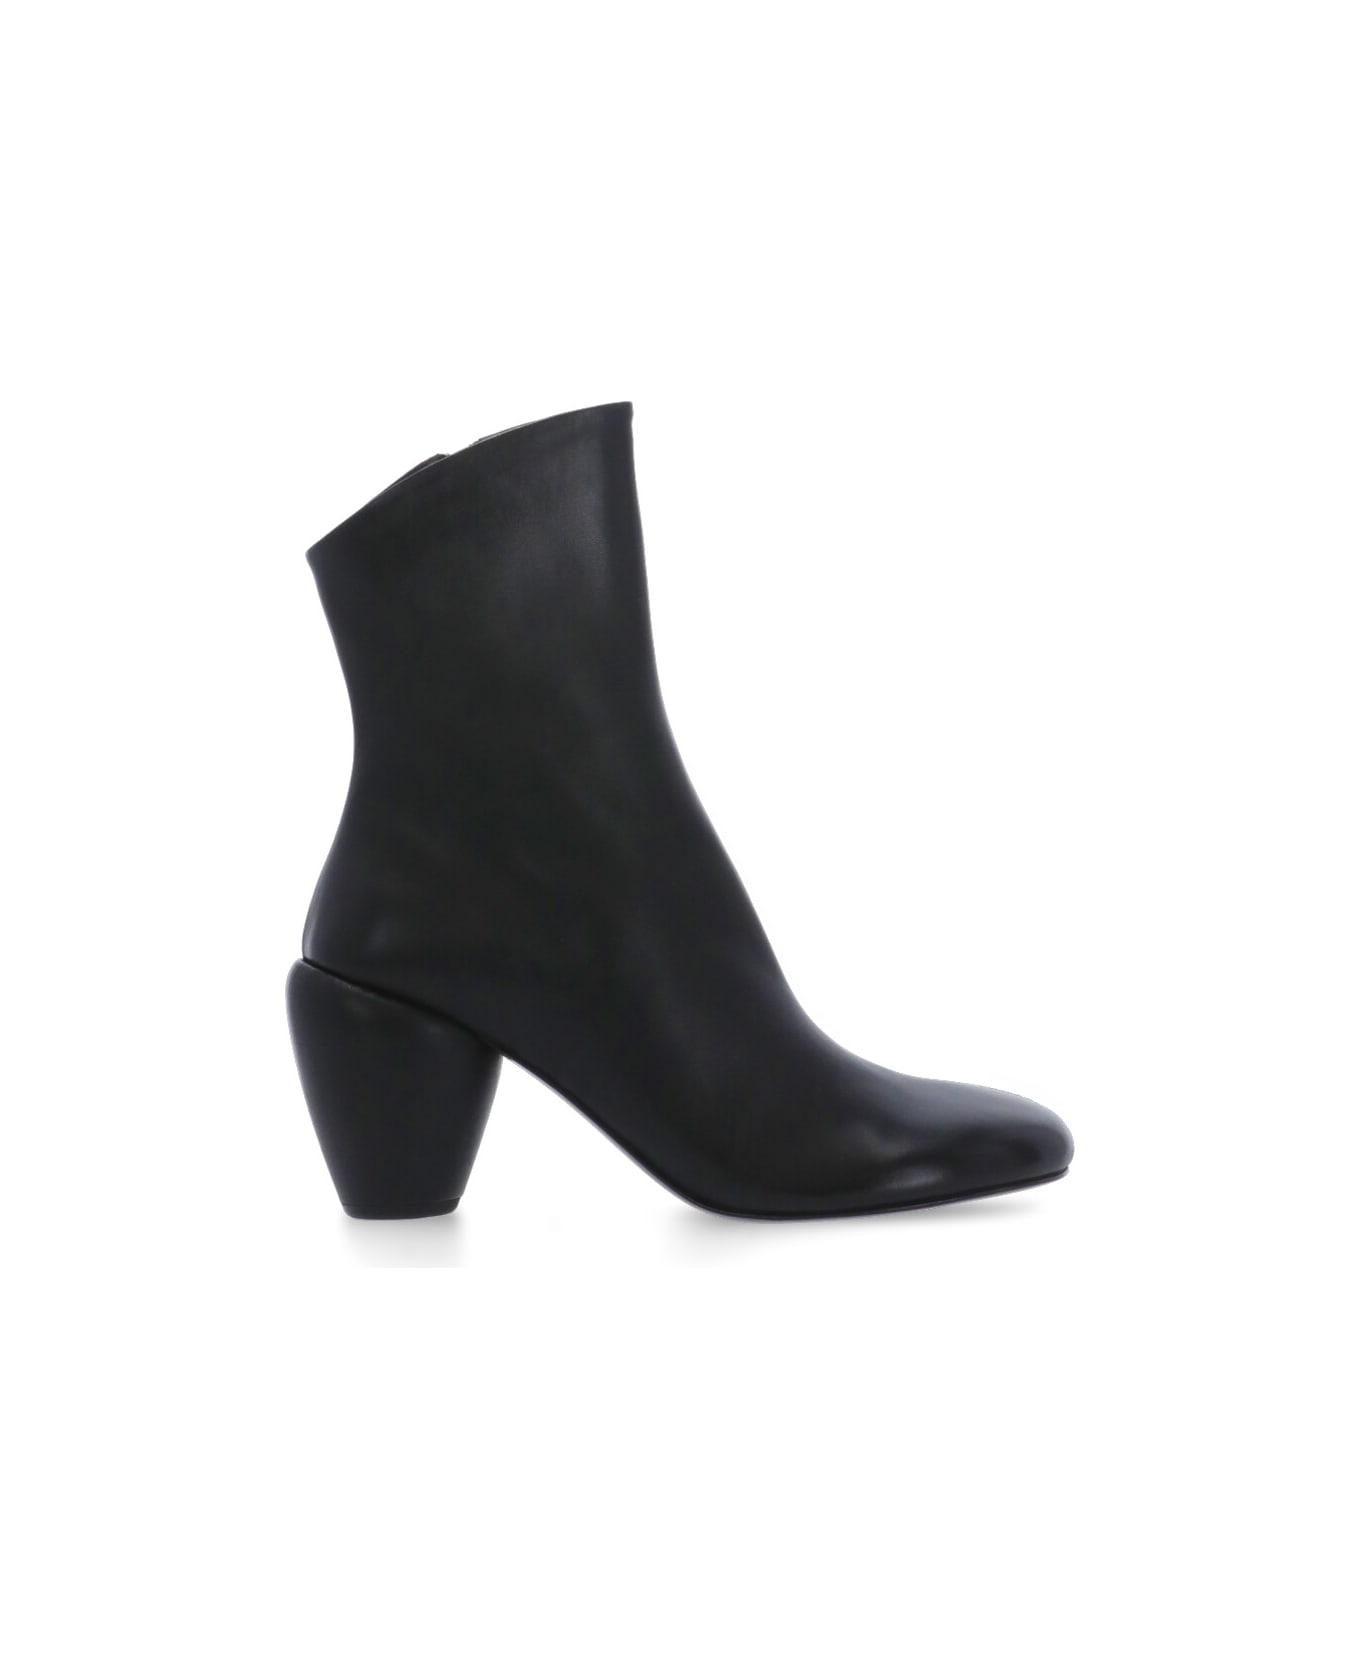 Marsell Leather Ankle Boots - Black ブーツ